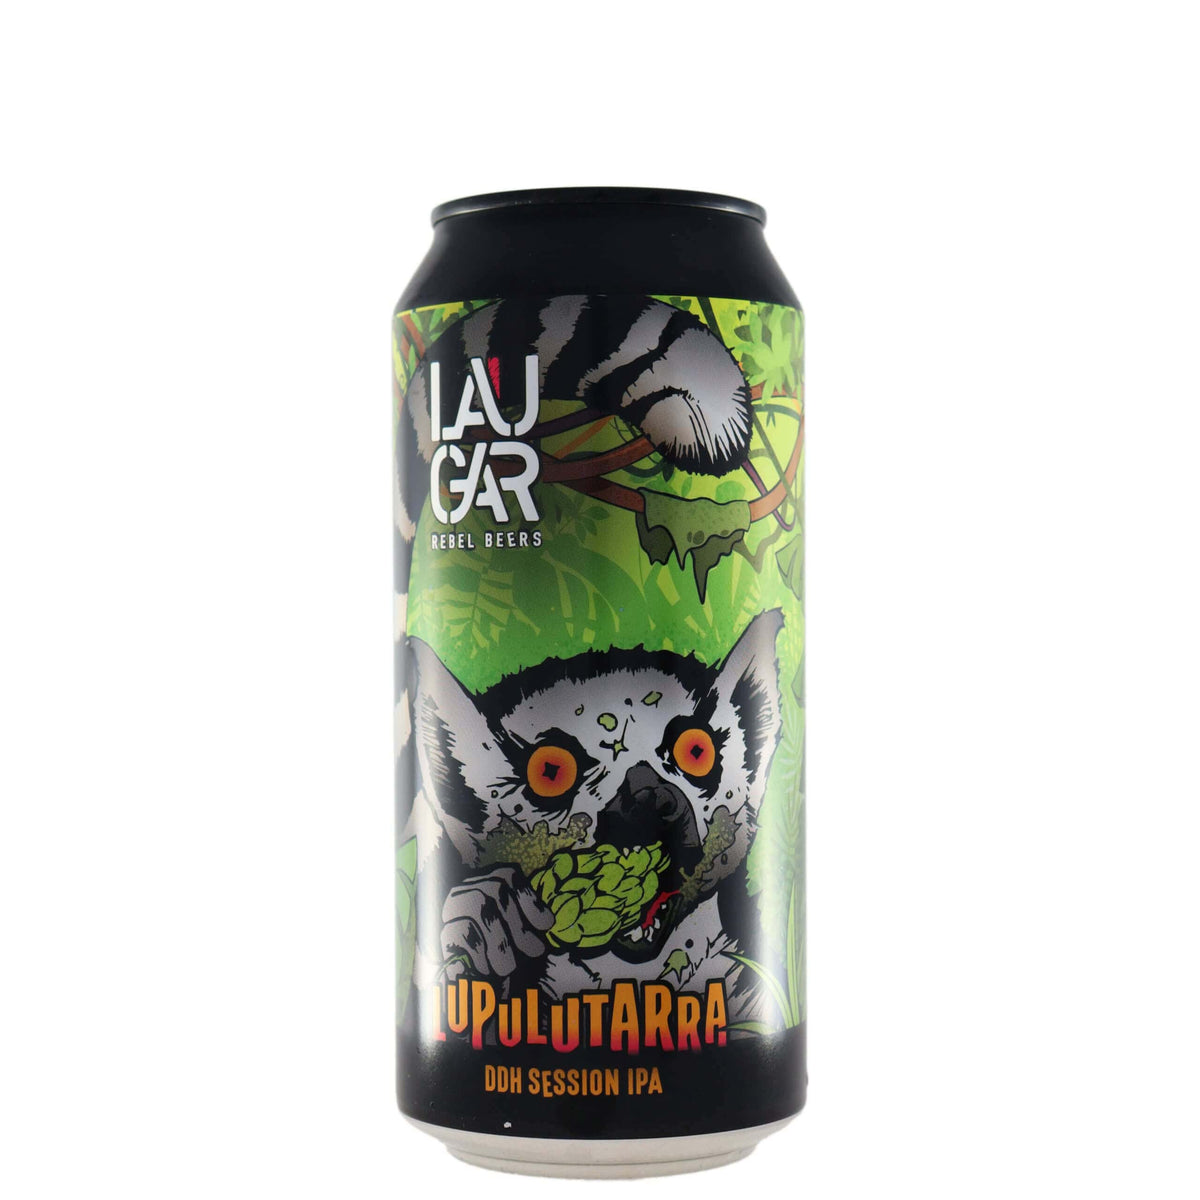 Lupulutarra | Laugar Brewery - Cans & Corks